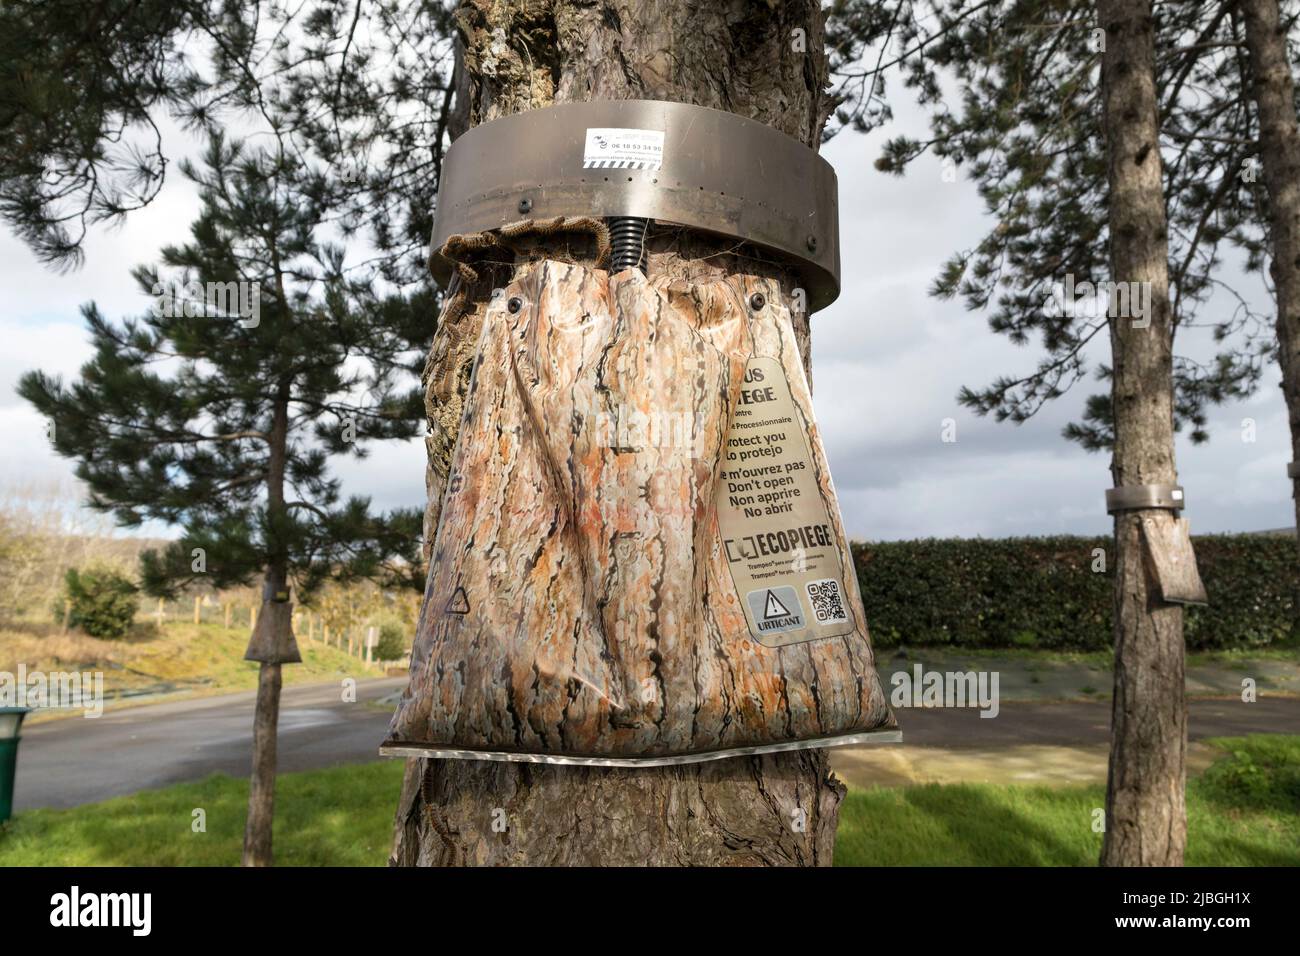 Trap Designed to Catch Pine Processionary Moth Caterpillars (Thaumetopoea pityocampa), Brittany, France Stock Photo